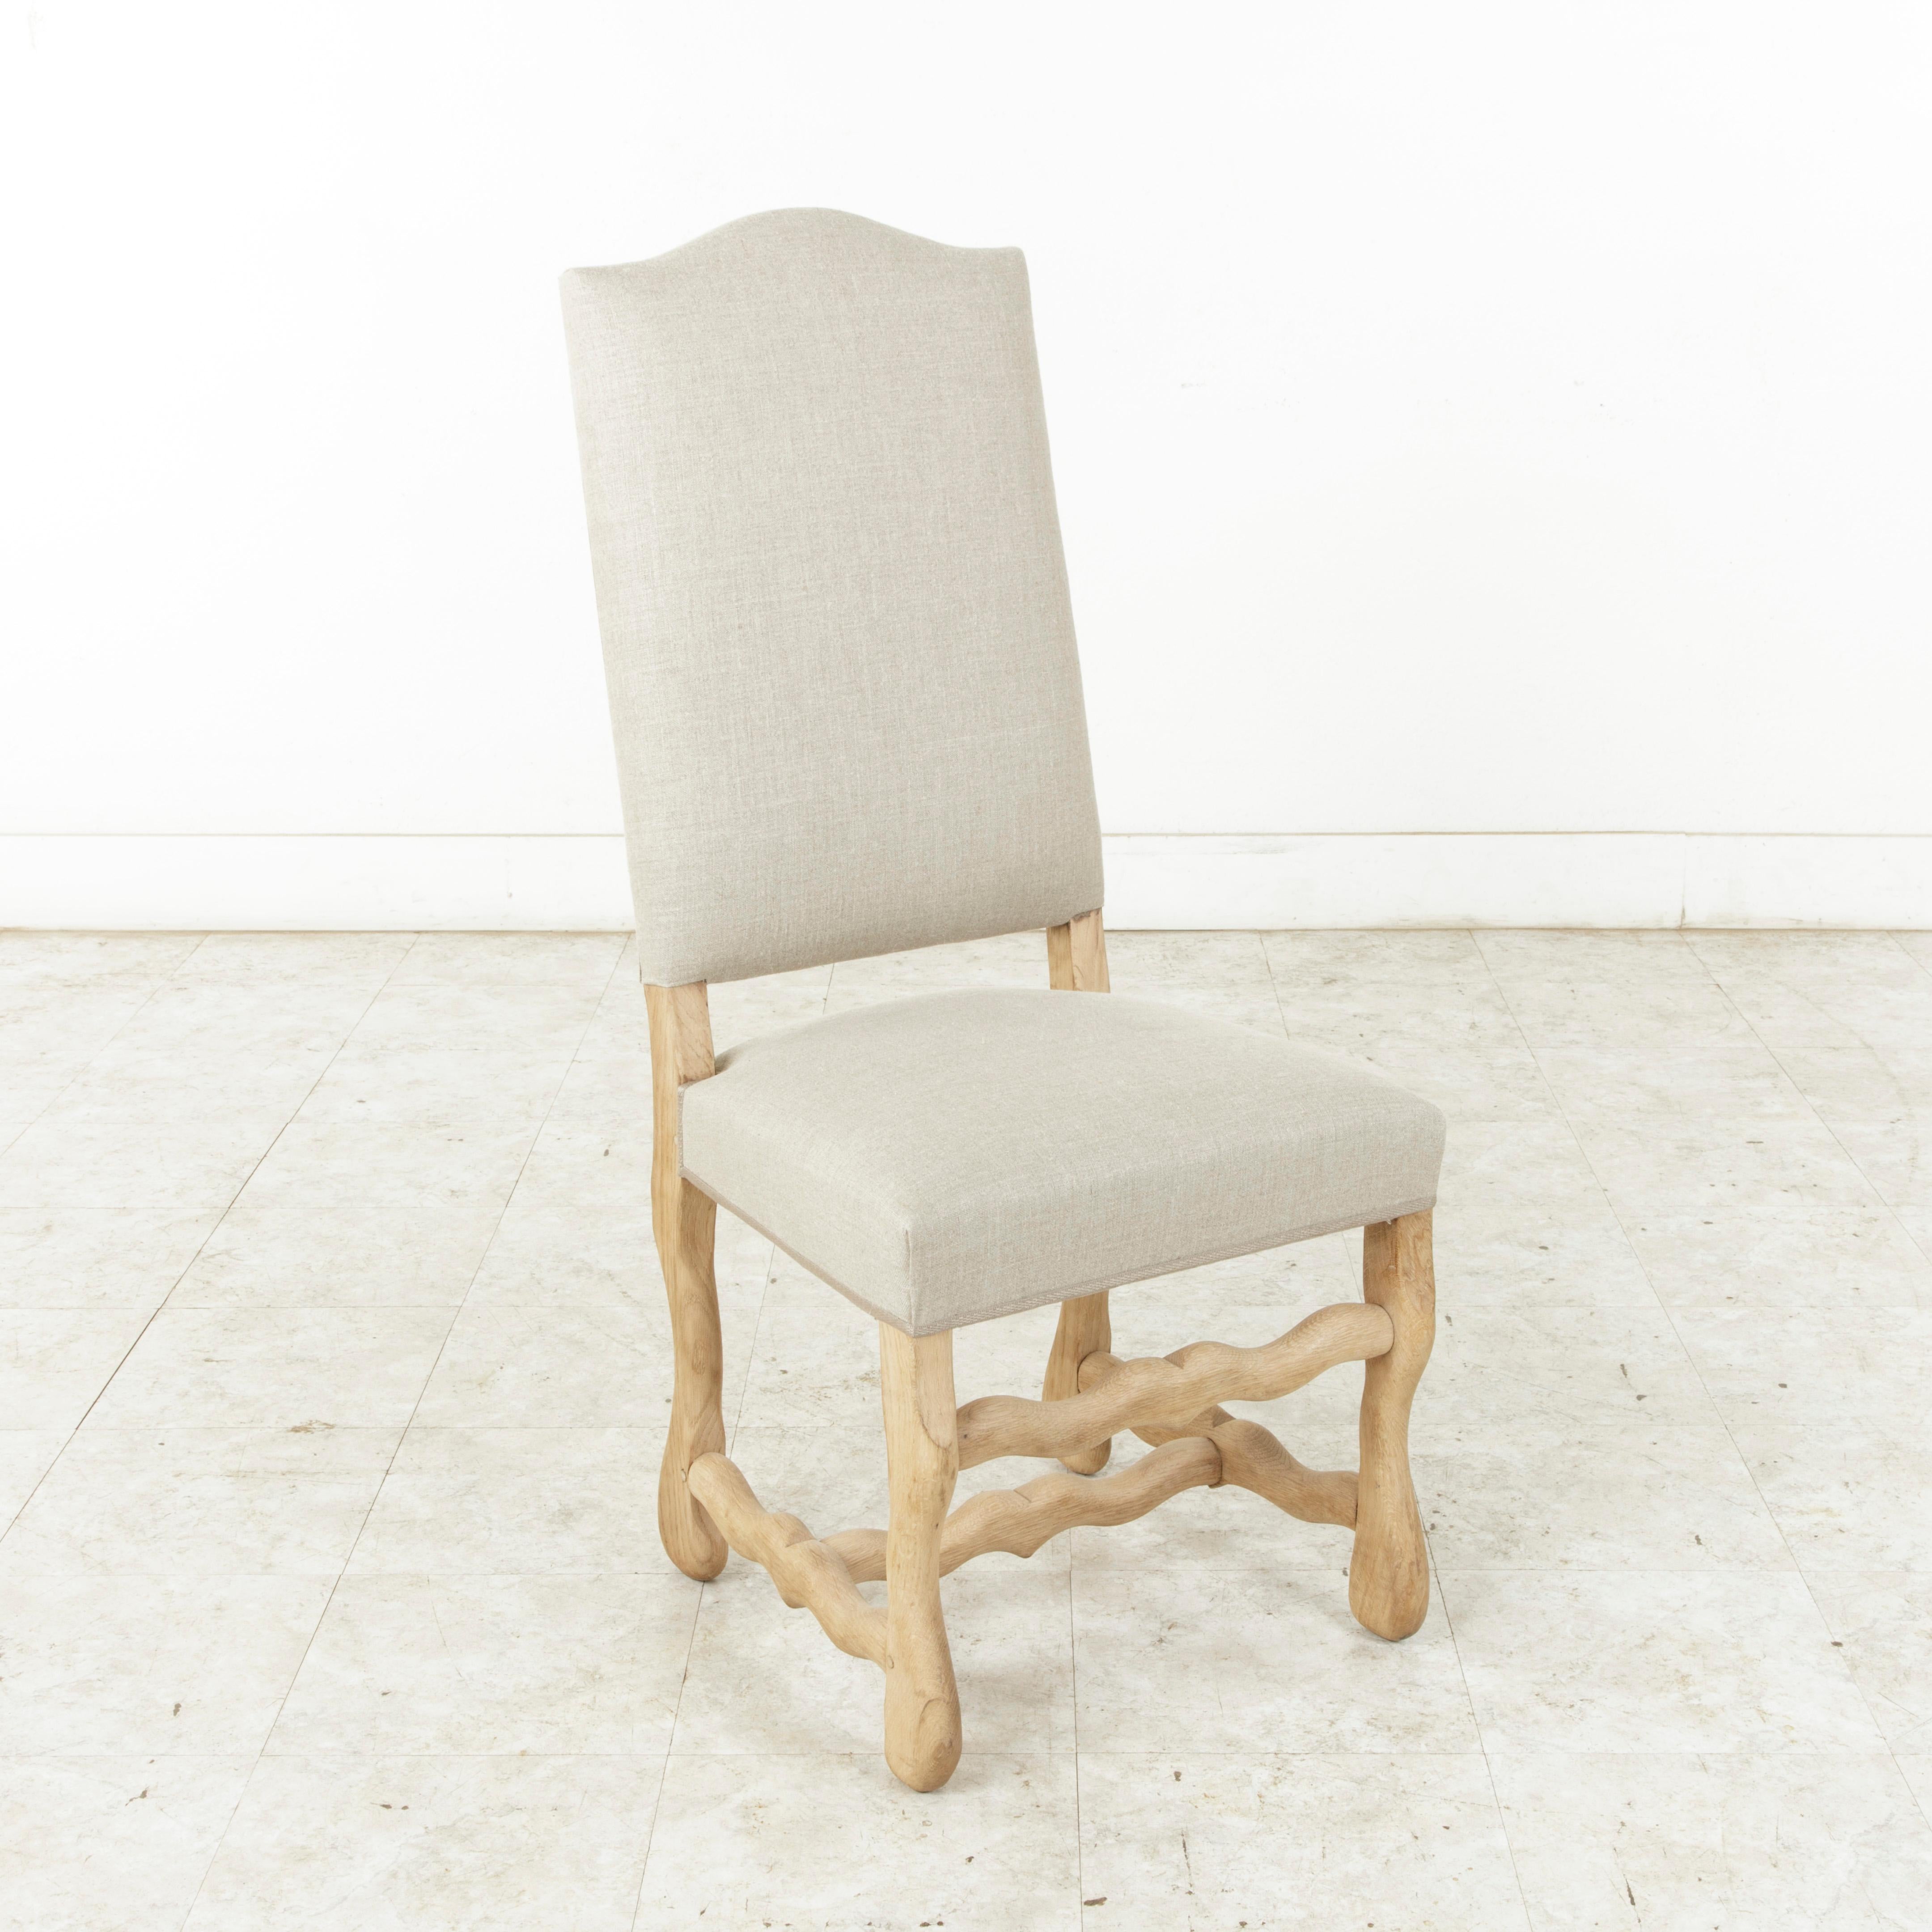 Newly upholstered in France in a beautiful neutral colored linen, this set of eight mutton leg dining chairs features sturdy hand pegged construction, providing stability to the frame. The unfinished oak and natural linen lend a light, airy feel to